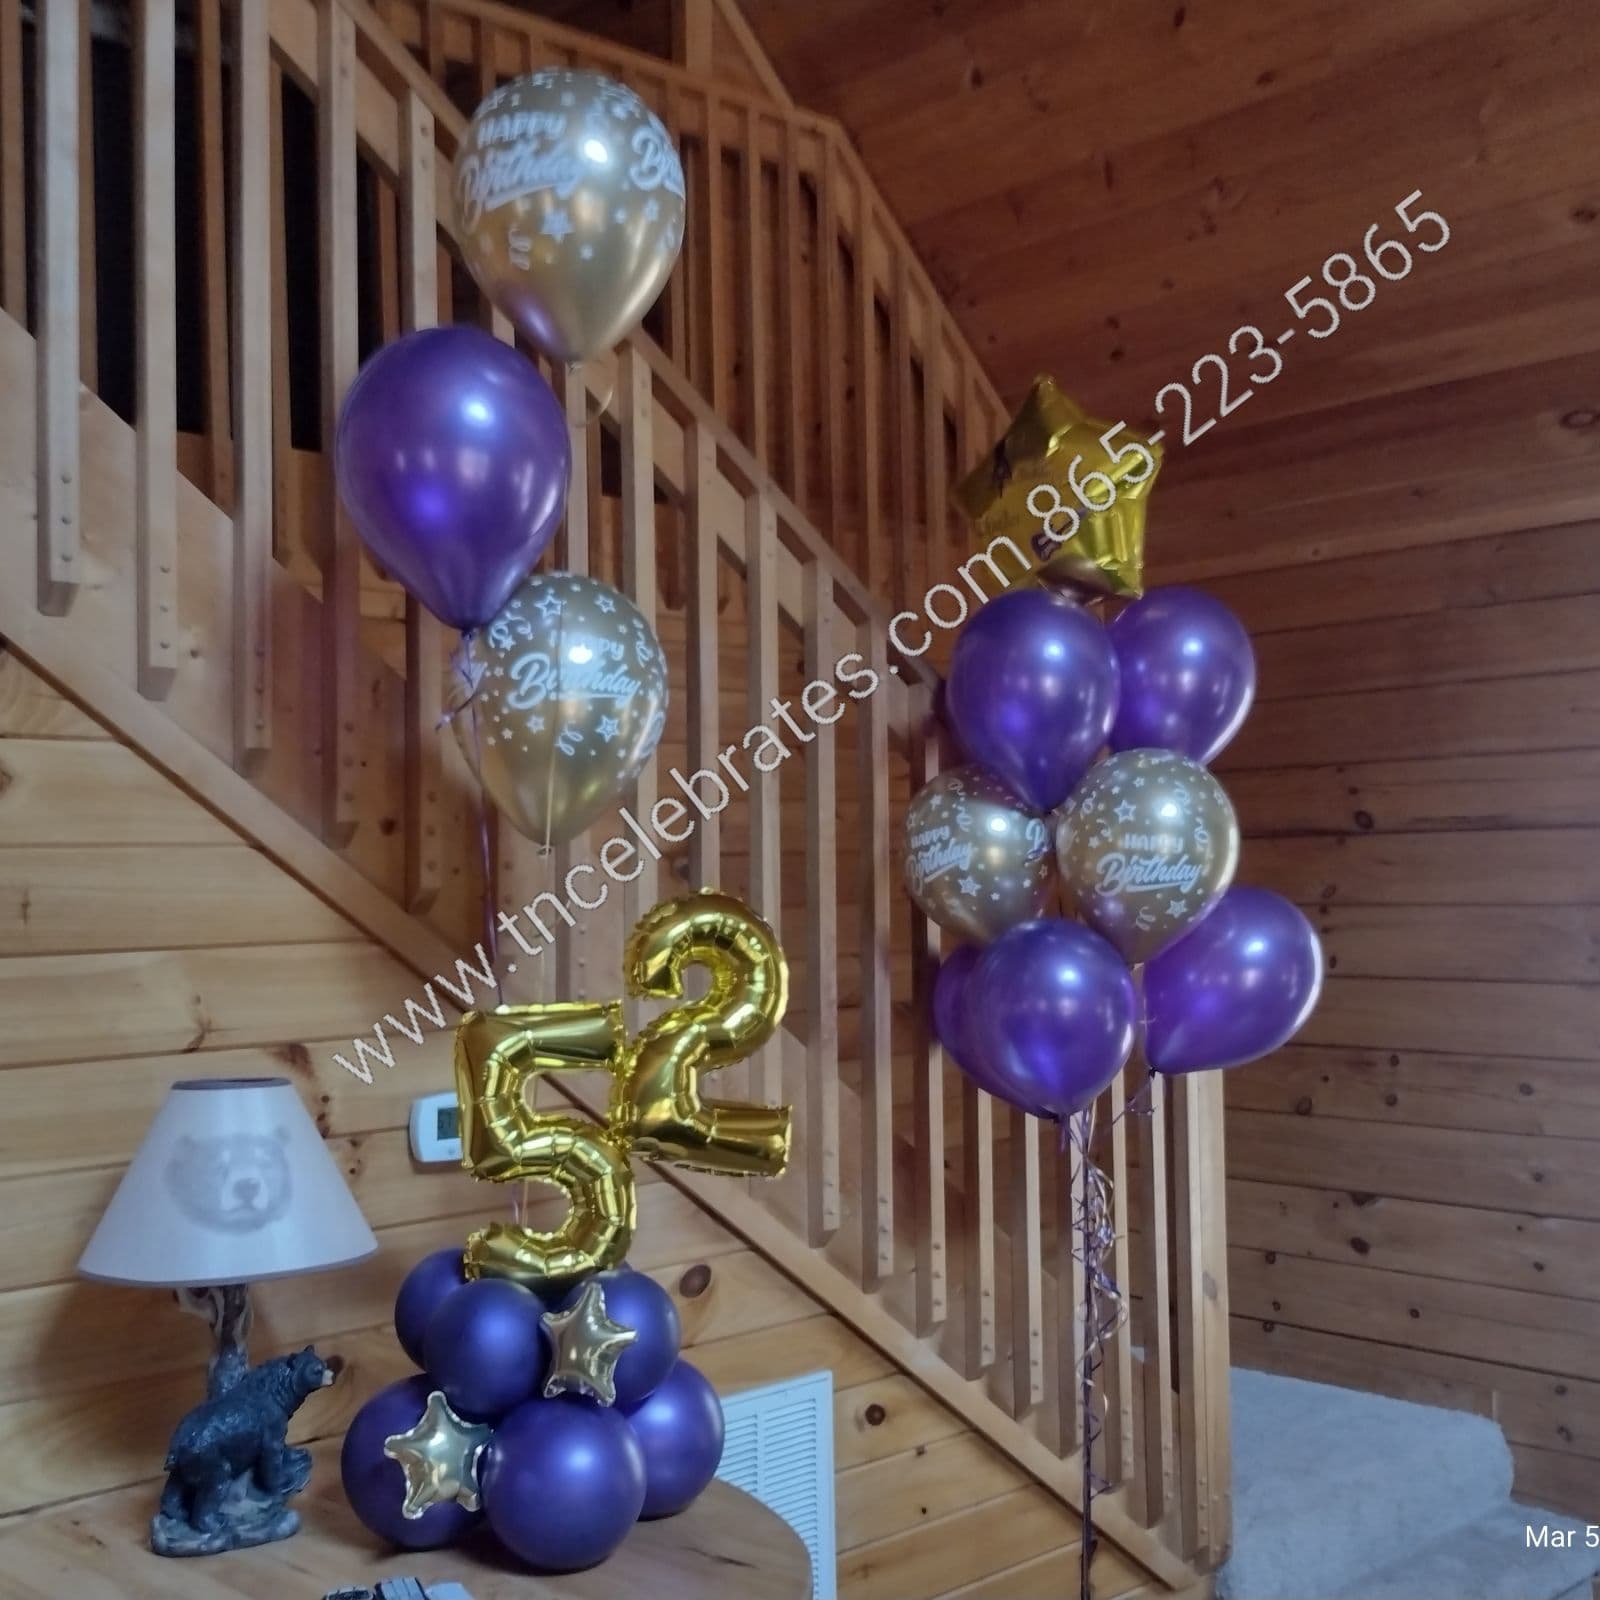 Purple and gold birthday balloon centerpiece and floating balloon bouquet